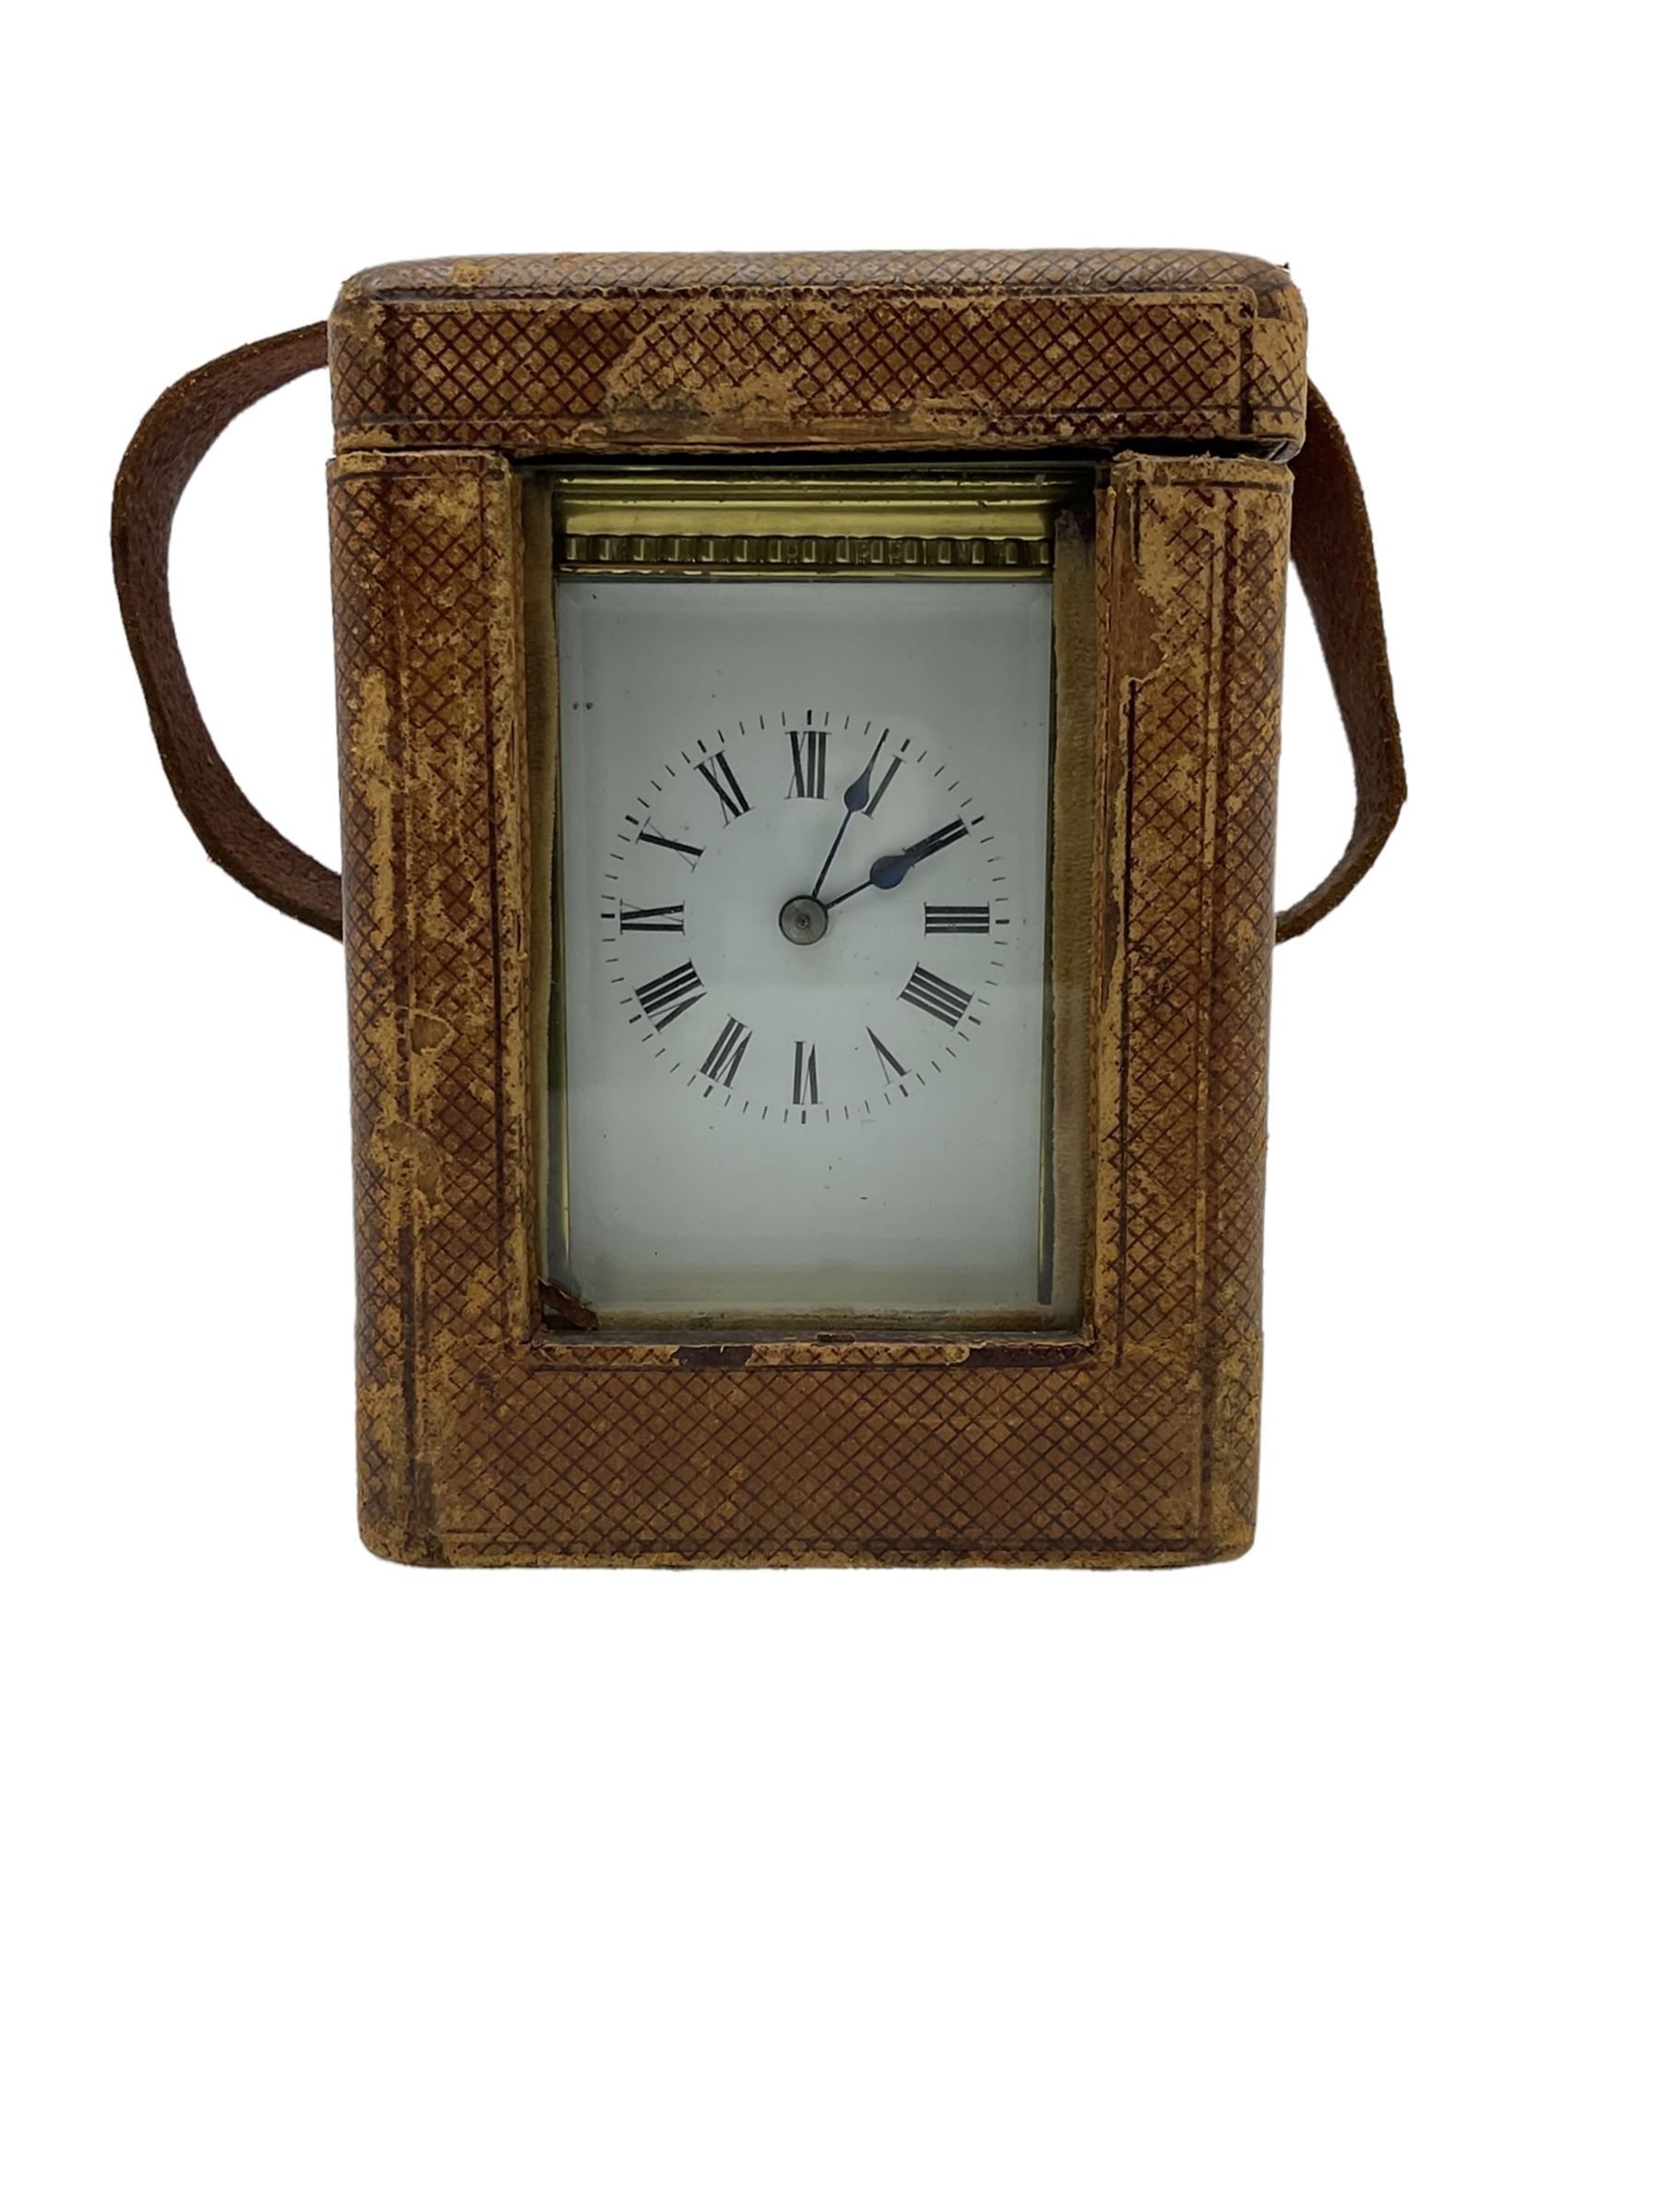 French carriage clock c1910 with strike and repeat work in a corniche case with beadwork